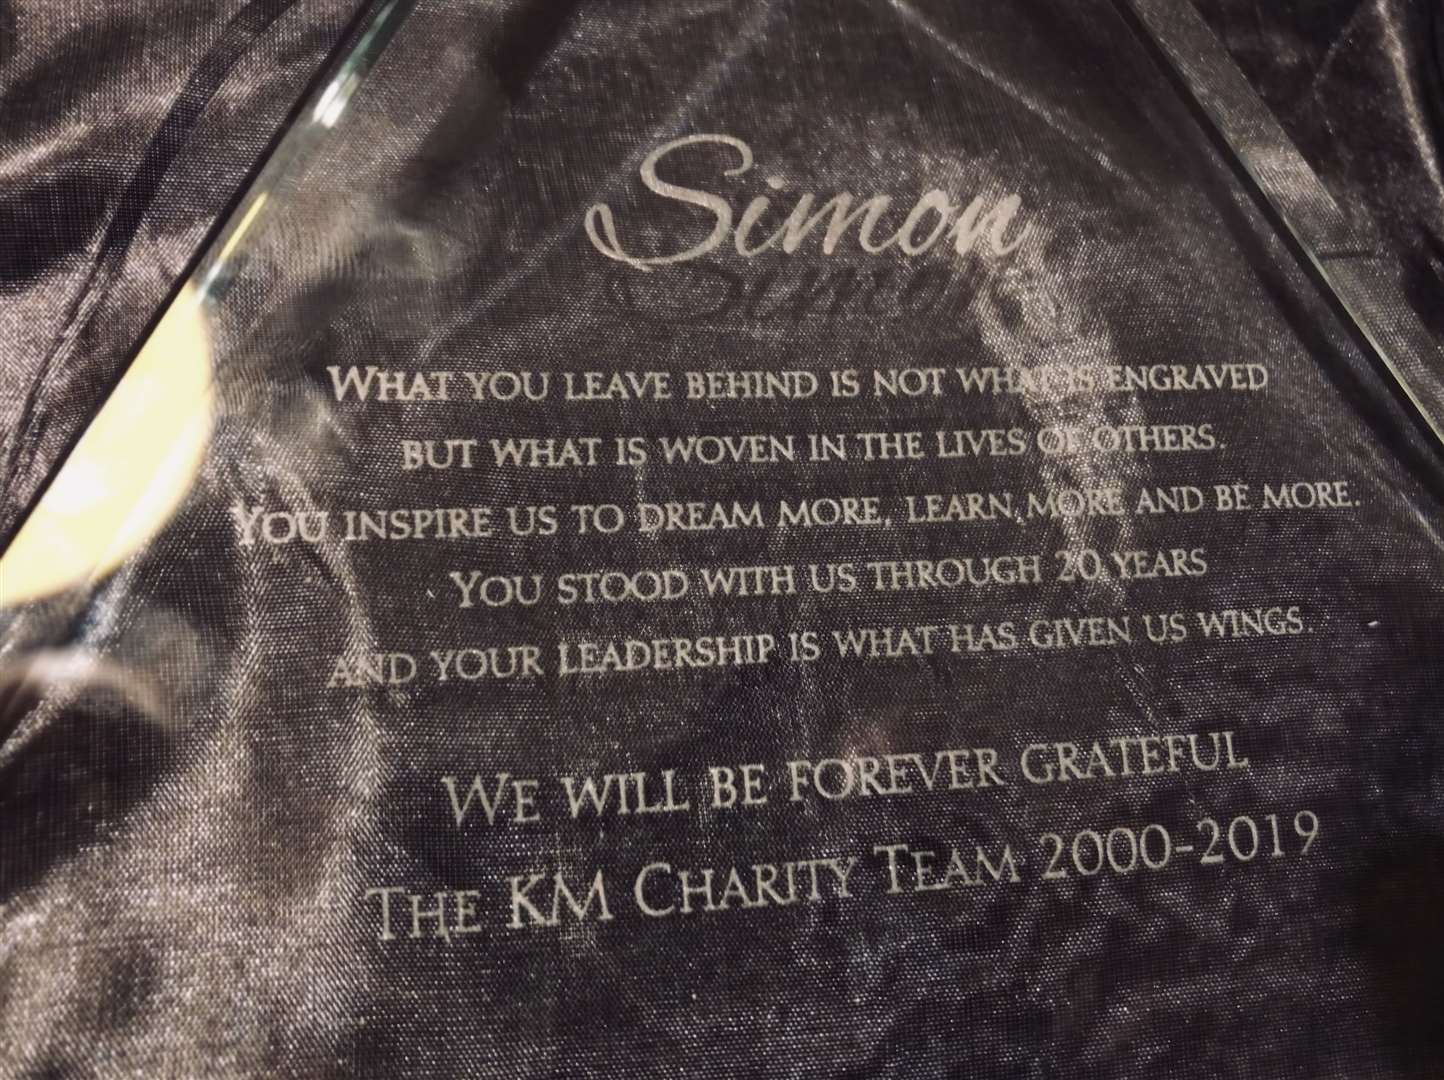 KM Charity Team staff presented outgoing CEO Simon Dolby with an engraved trophy. (16213957)